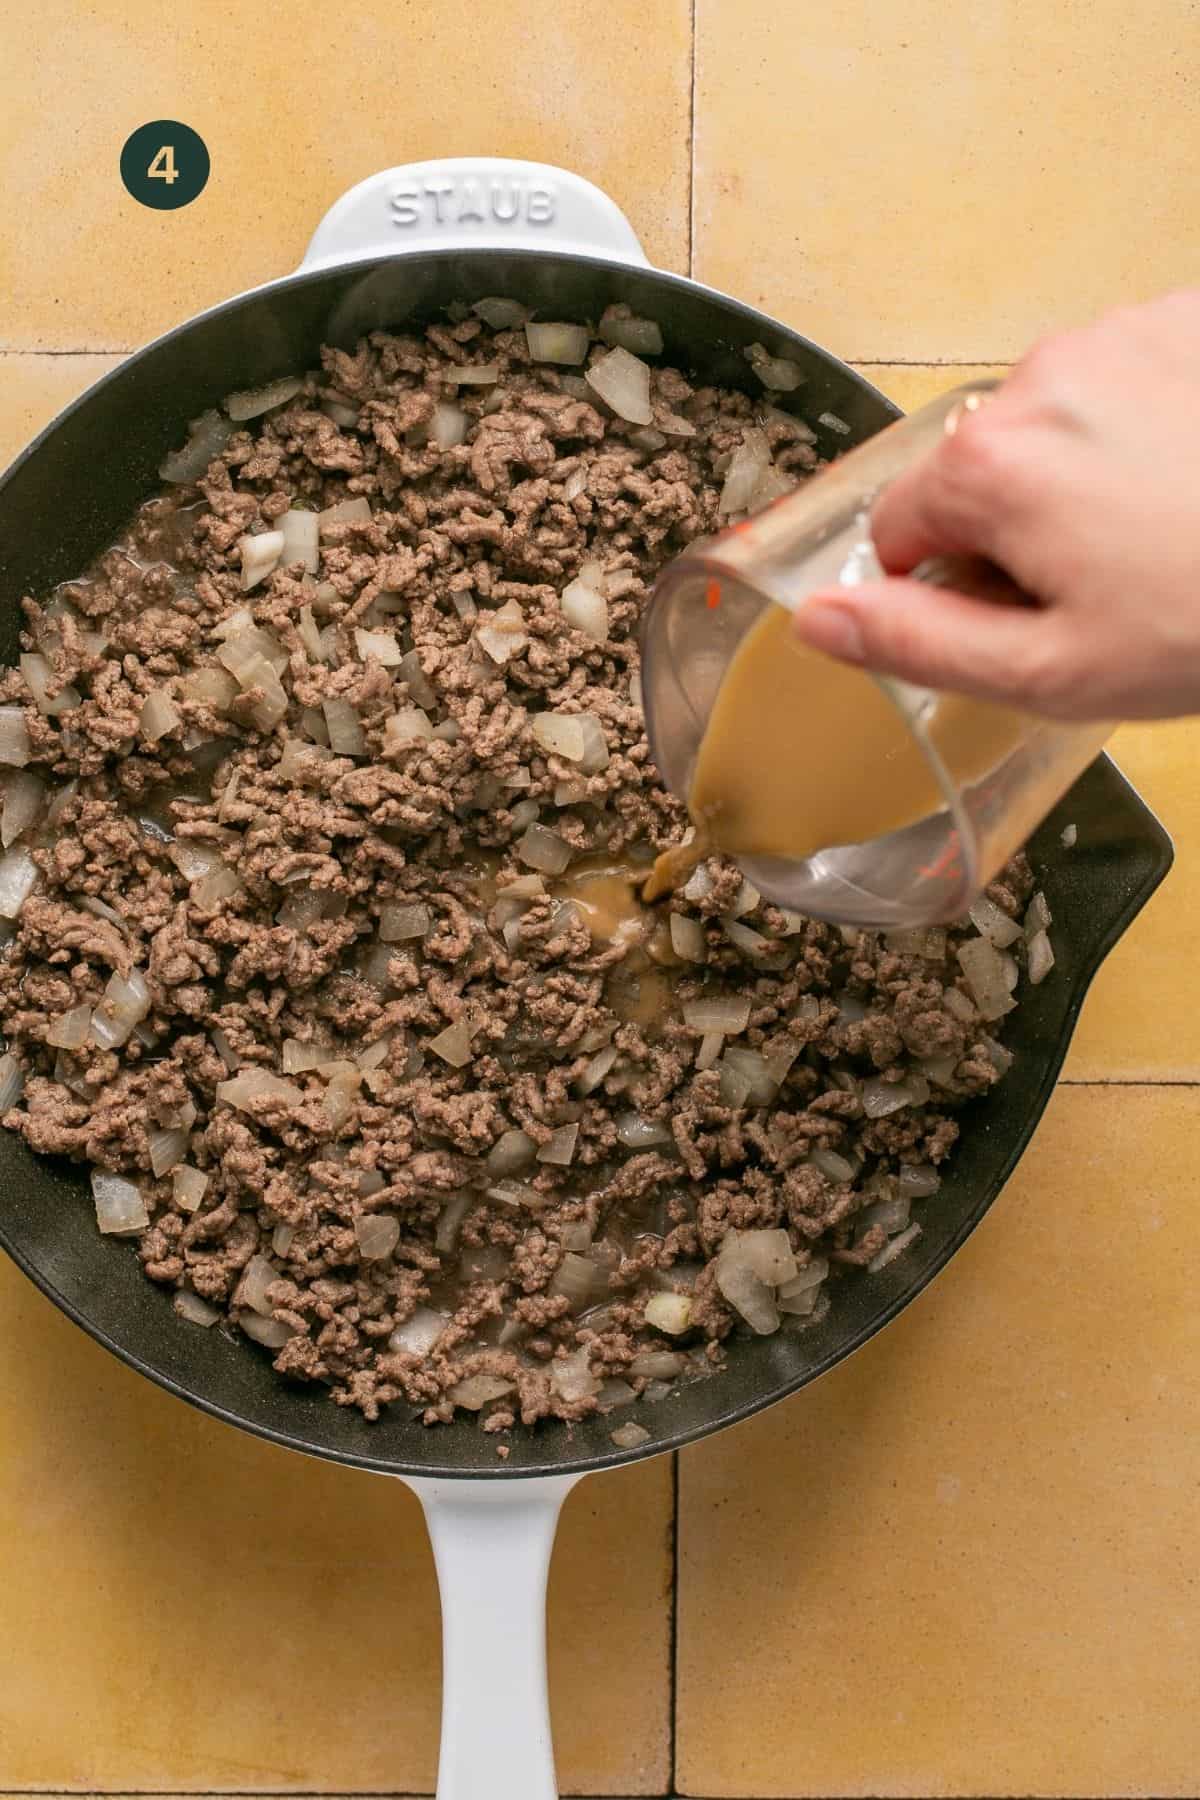 Broth added to ground beef mixture in the pan.